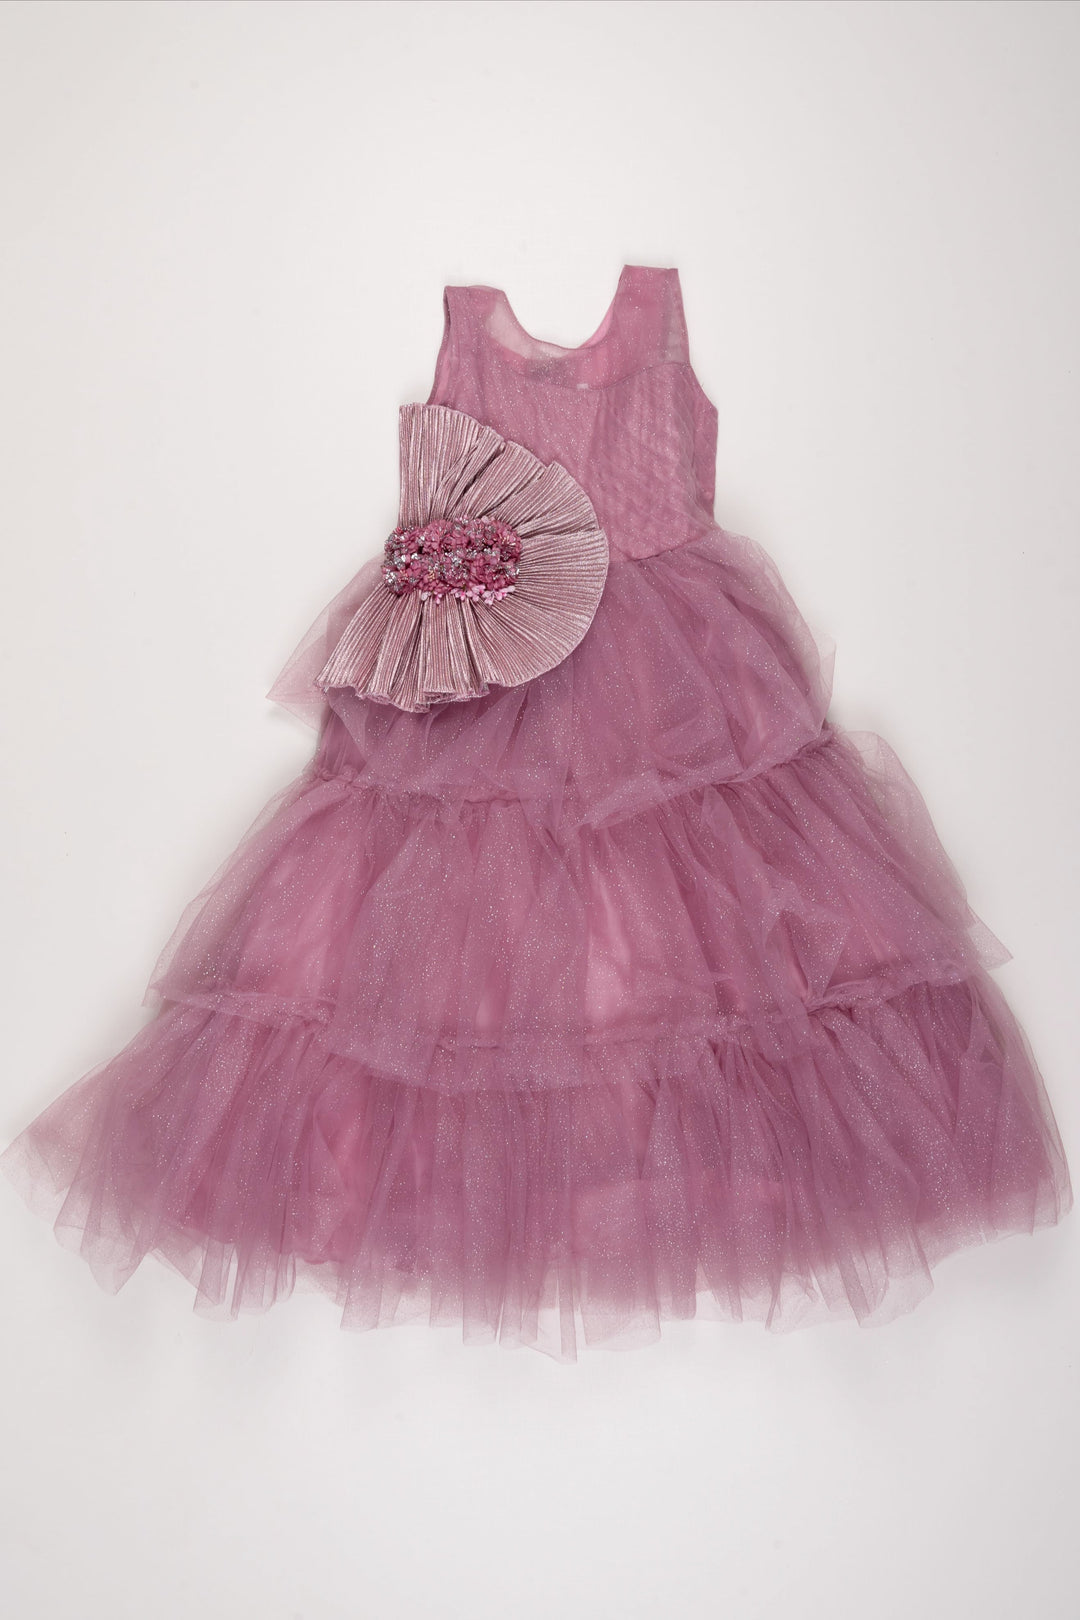 The Nesavu Girls Party Gown Enchanted Pink Tulle Princess Dress with Floral Accents for Girls Nesavu 22 (4Y) / Pink / Plain Net GA190B-22 Girls Pink Tulle Dress | Floral Princess Gown | Special Occasion Elegance | The Nesavu